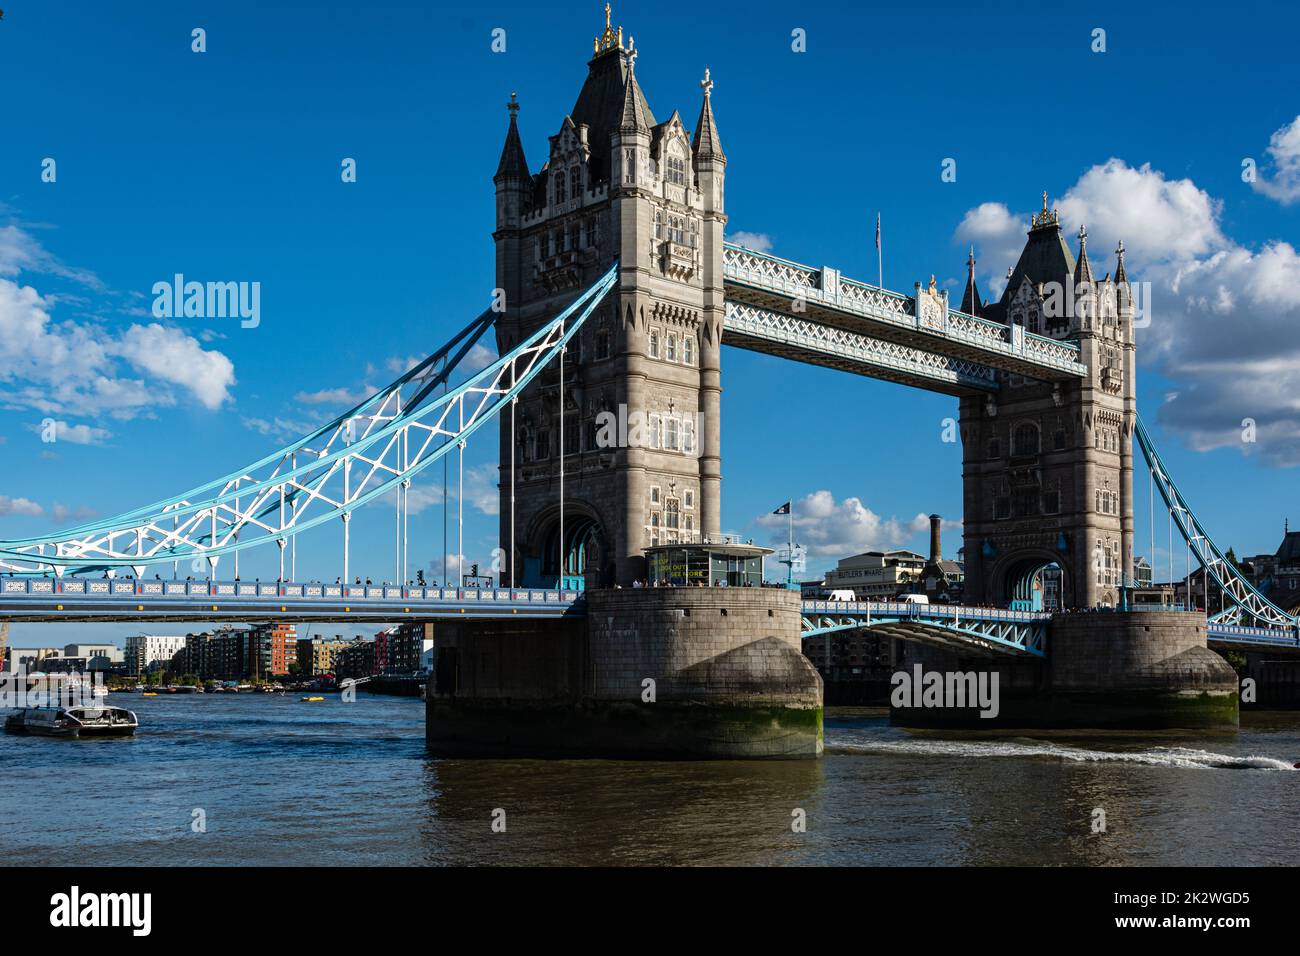 London,England,United Kingdom - August 24, 2022 : View of the Tower Bridge over River Thames Stock Photo